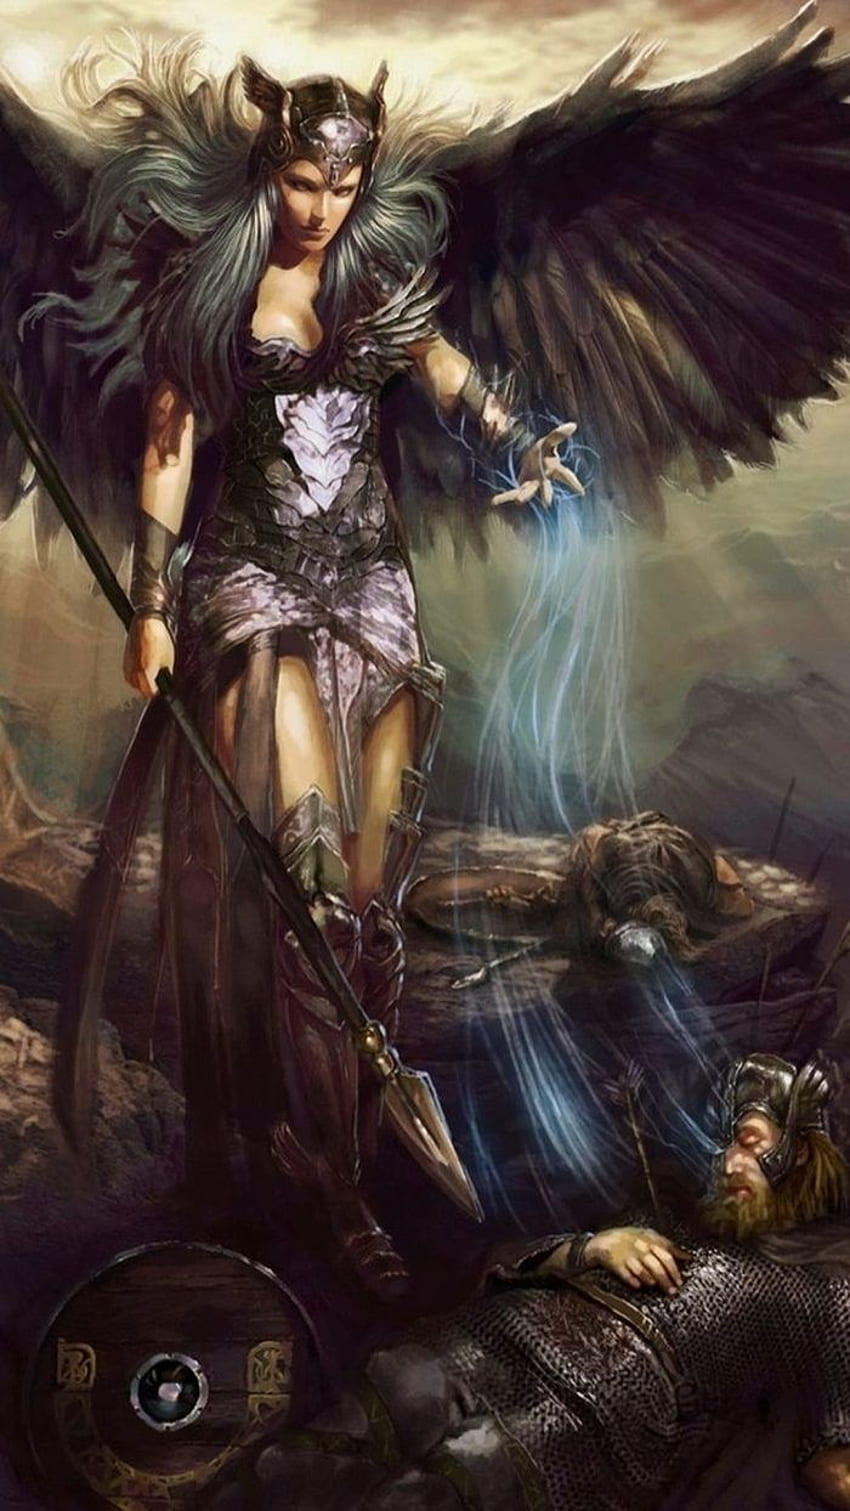 35 Amazing Valkyrie Tattoos That You Must See  Tattoo Me Now